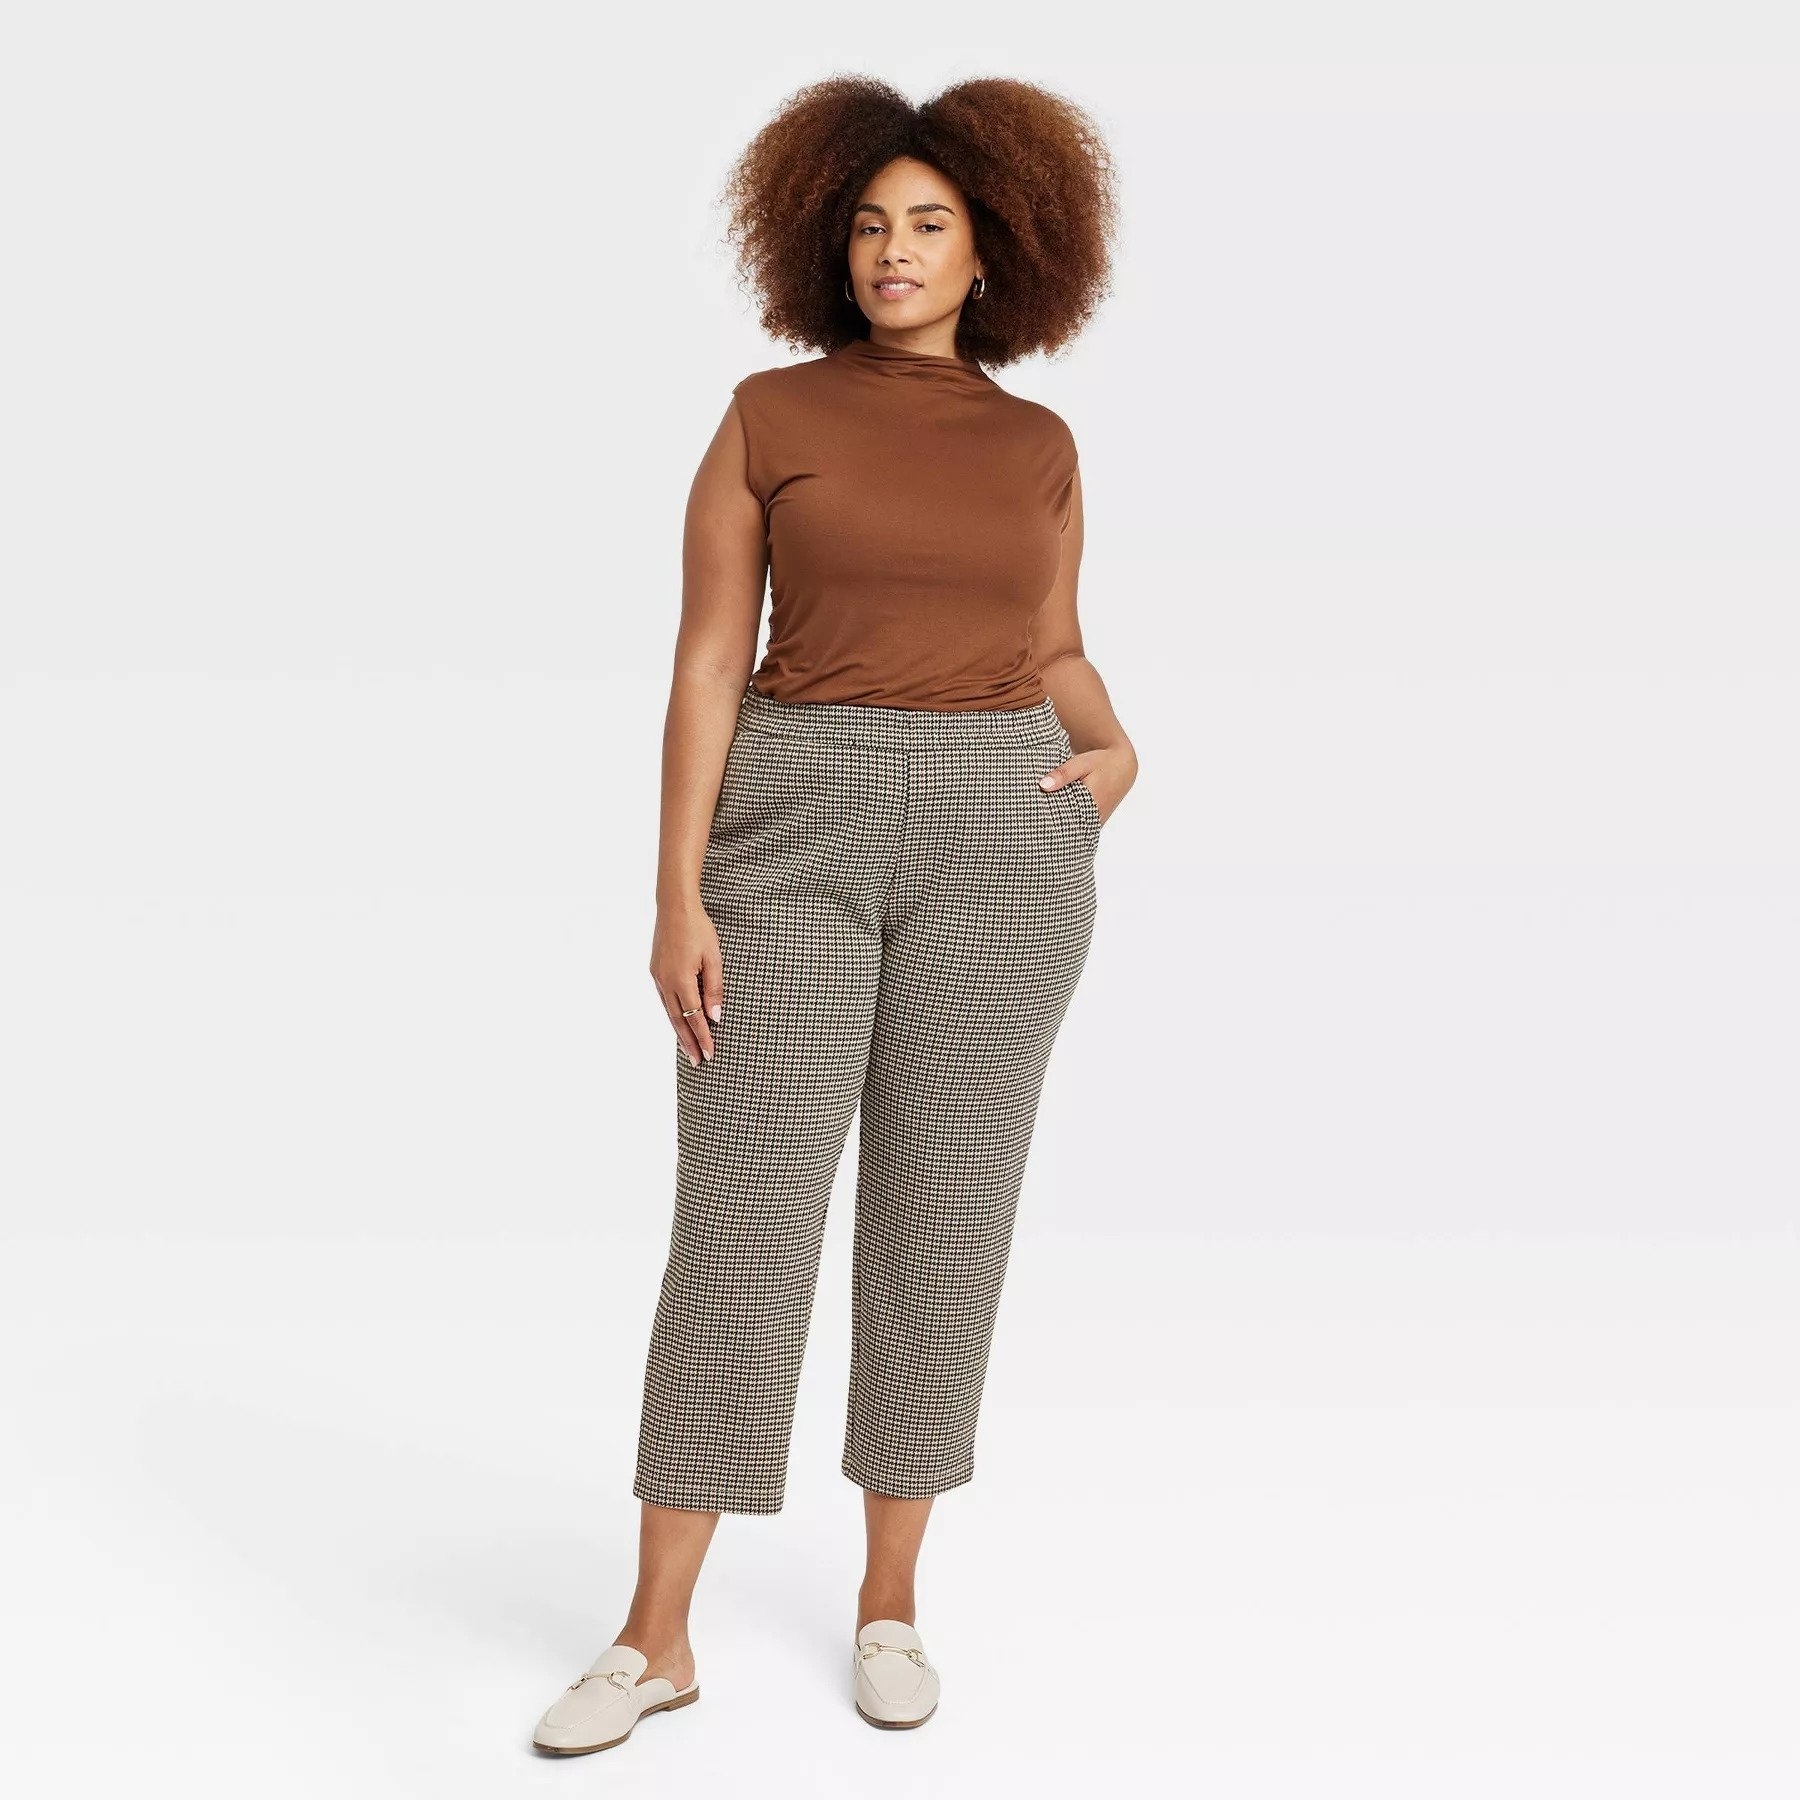 A model wearing the tapered pants with elasticated waist